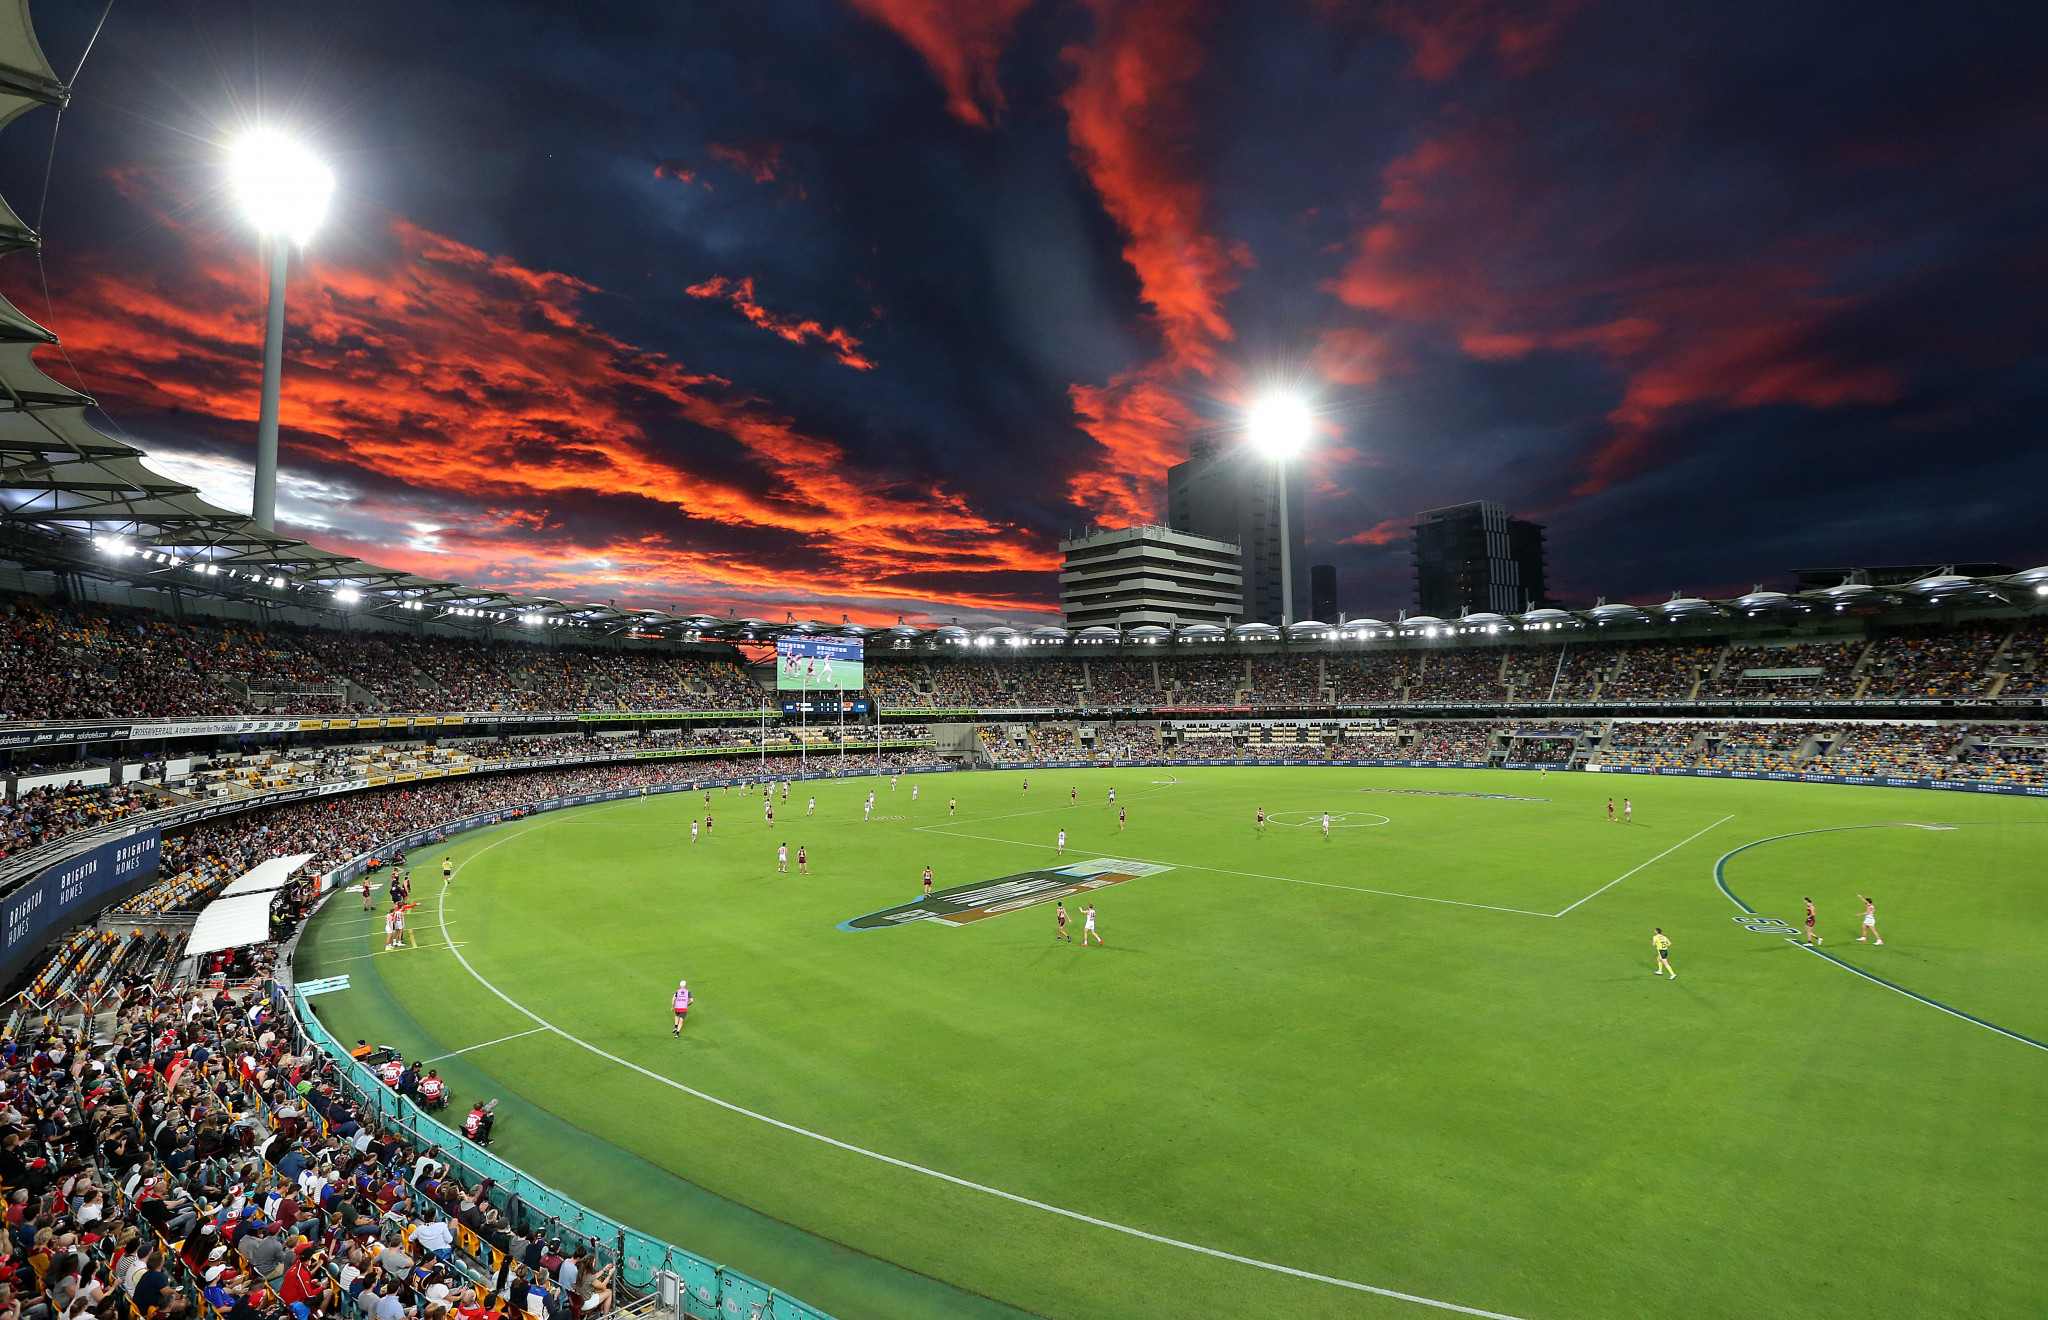 It is hoped that the new river crossing will improve access to the Brisbane Cricket Ground, which is set to serve as the main venue for the Olympics Games in 2032 ©Getty Images